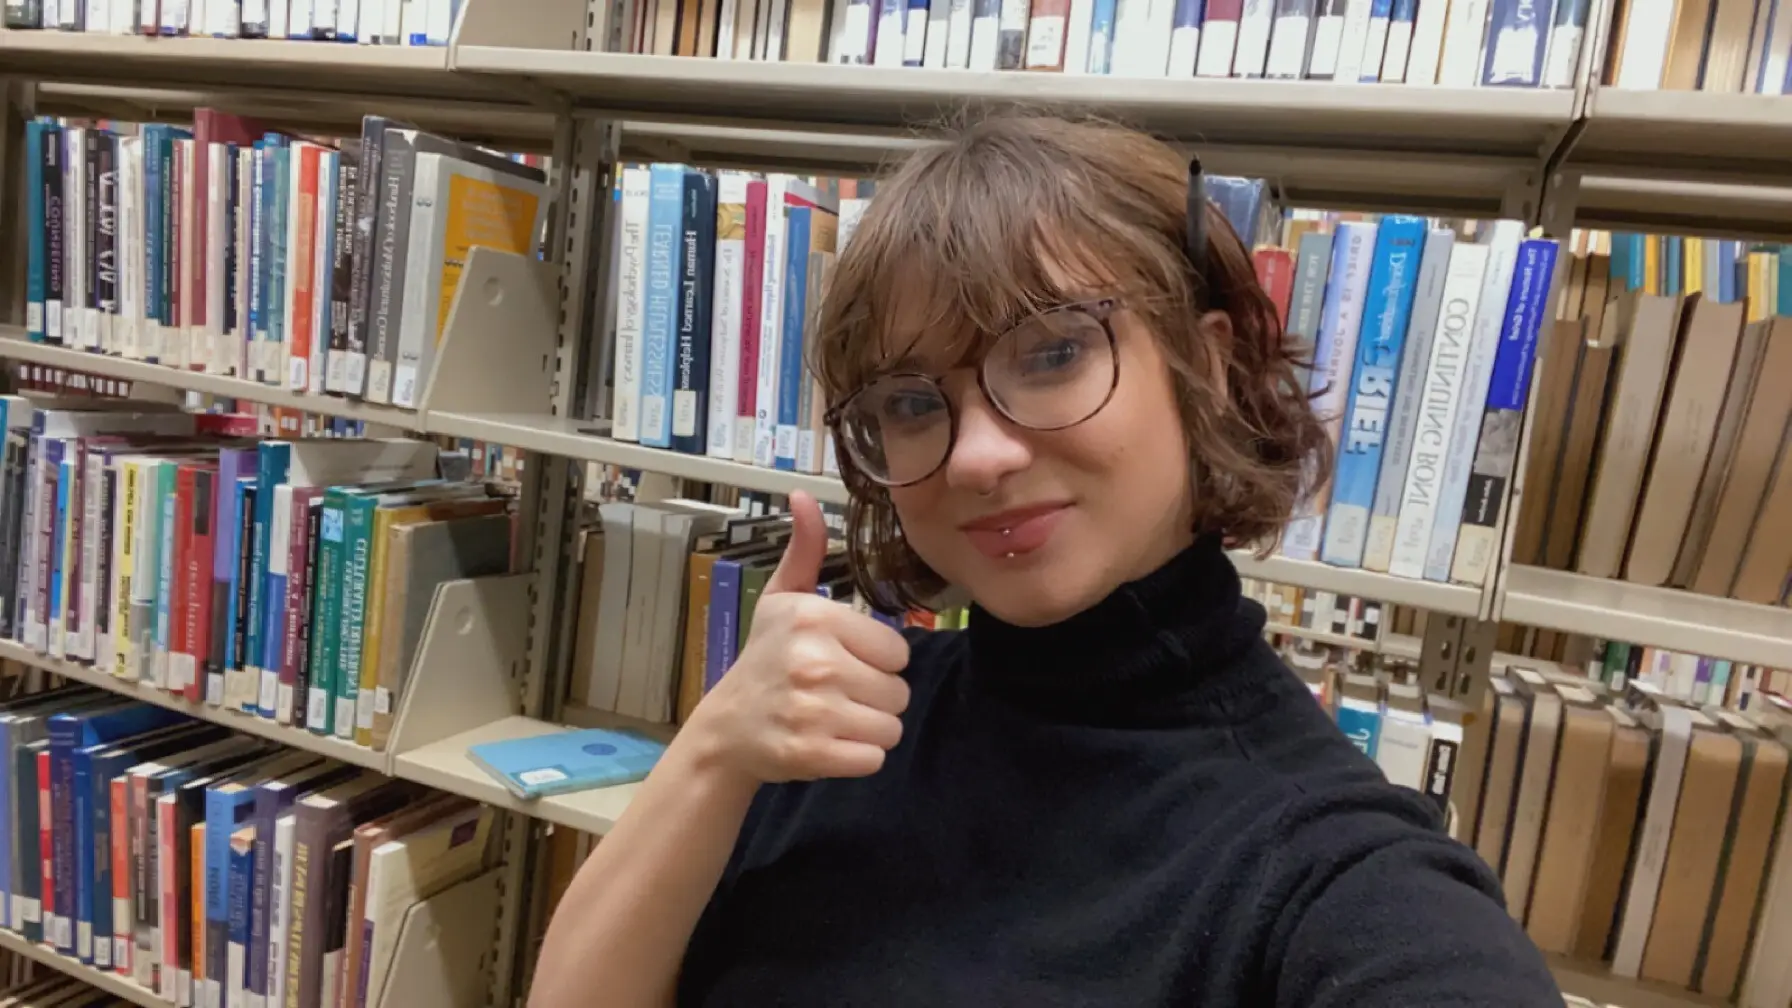 Danita Mapes '23 gives a thumbs up among the shelves in Landman Library